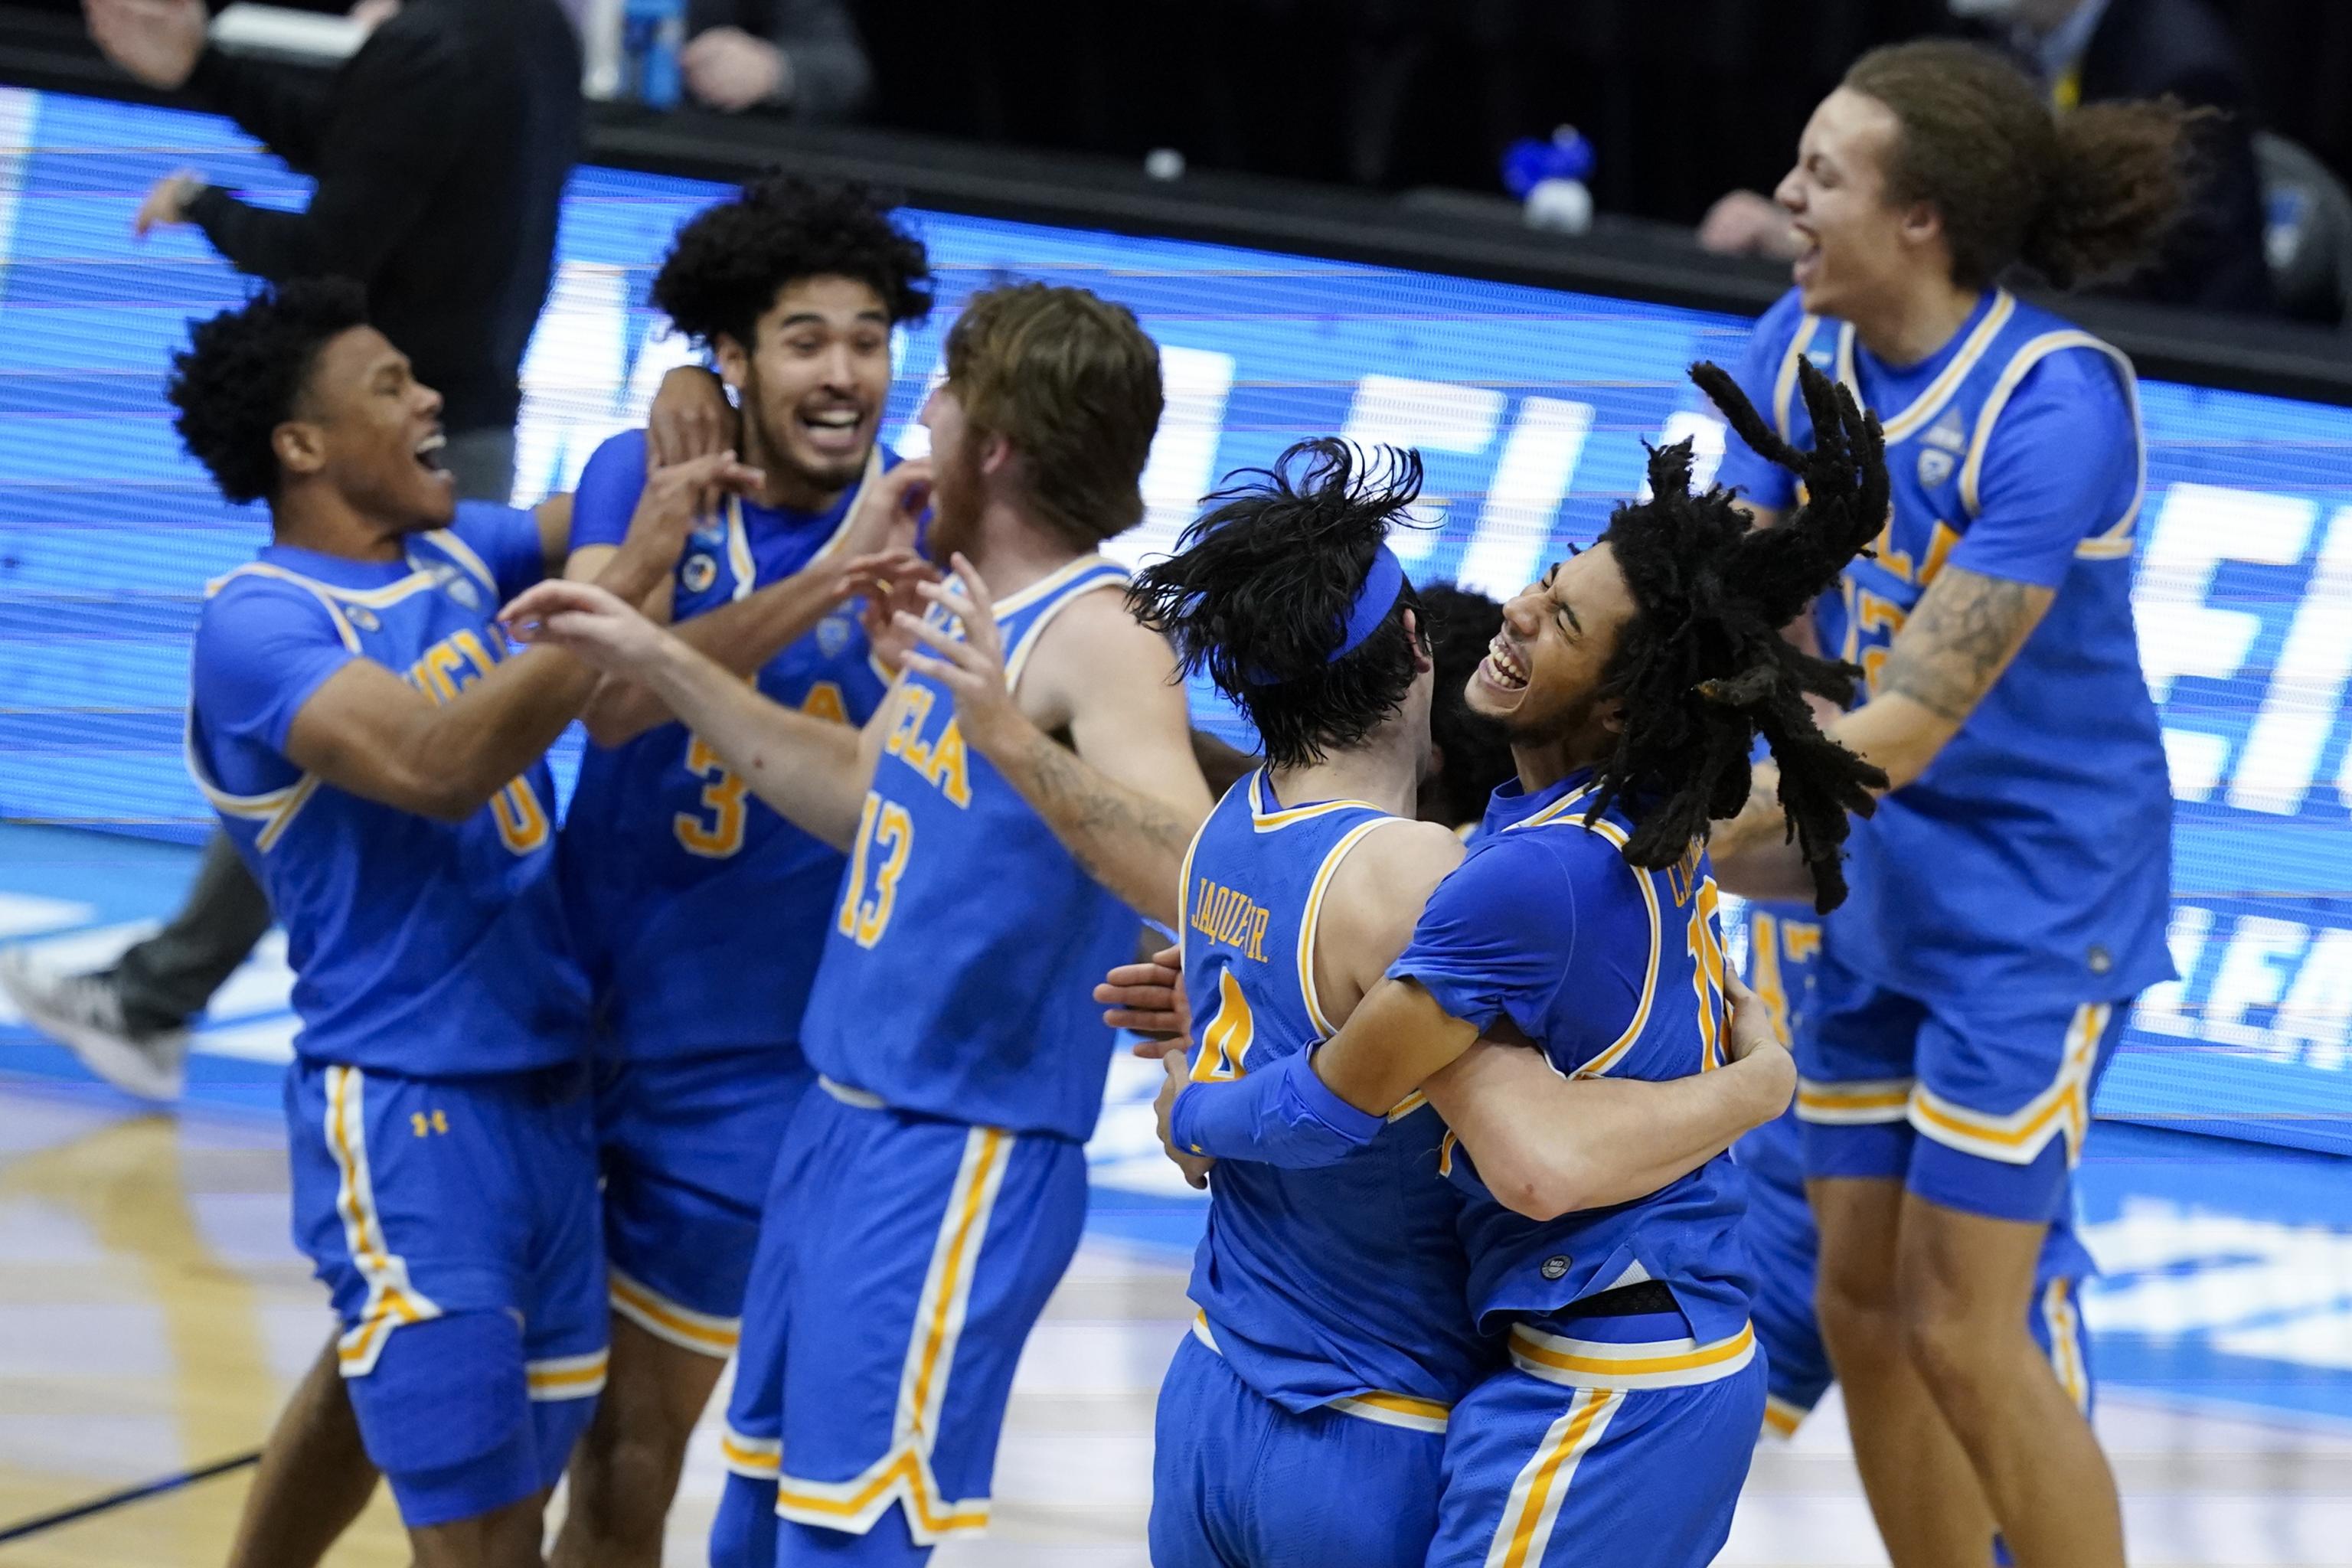 2020-21 UCLA Men's Basketball Information Guide by UCLA Athletics